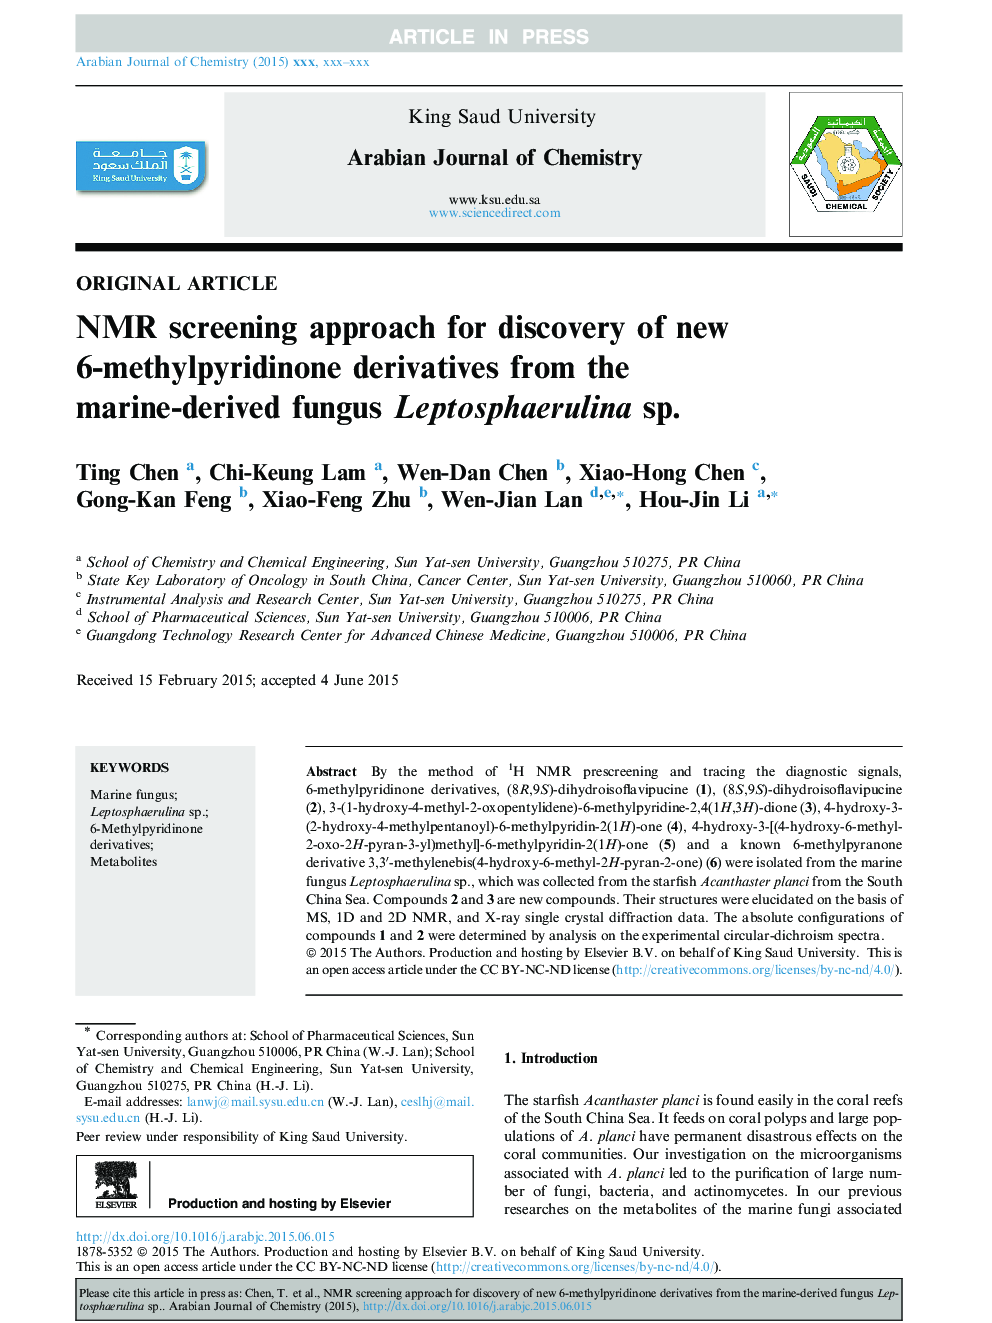 NMR screening approach for discovery of new 6-methylpyridinone derivatives from the marine-derived fungus Leptosphaerulina sp.